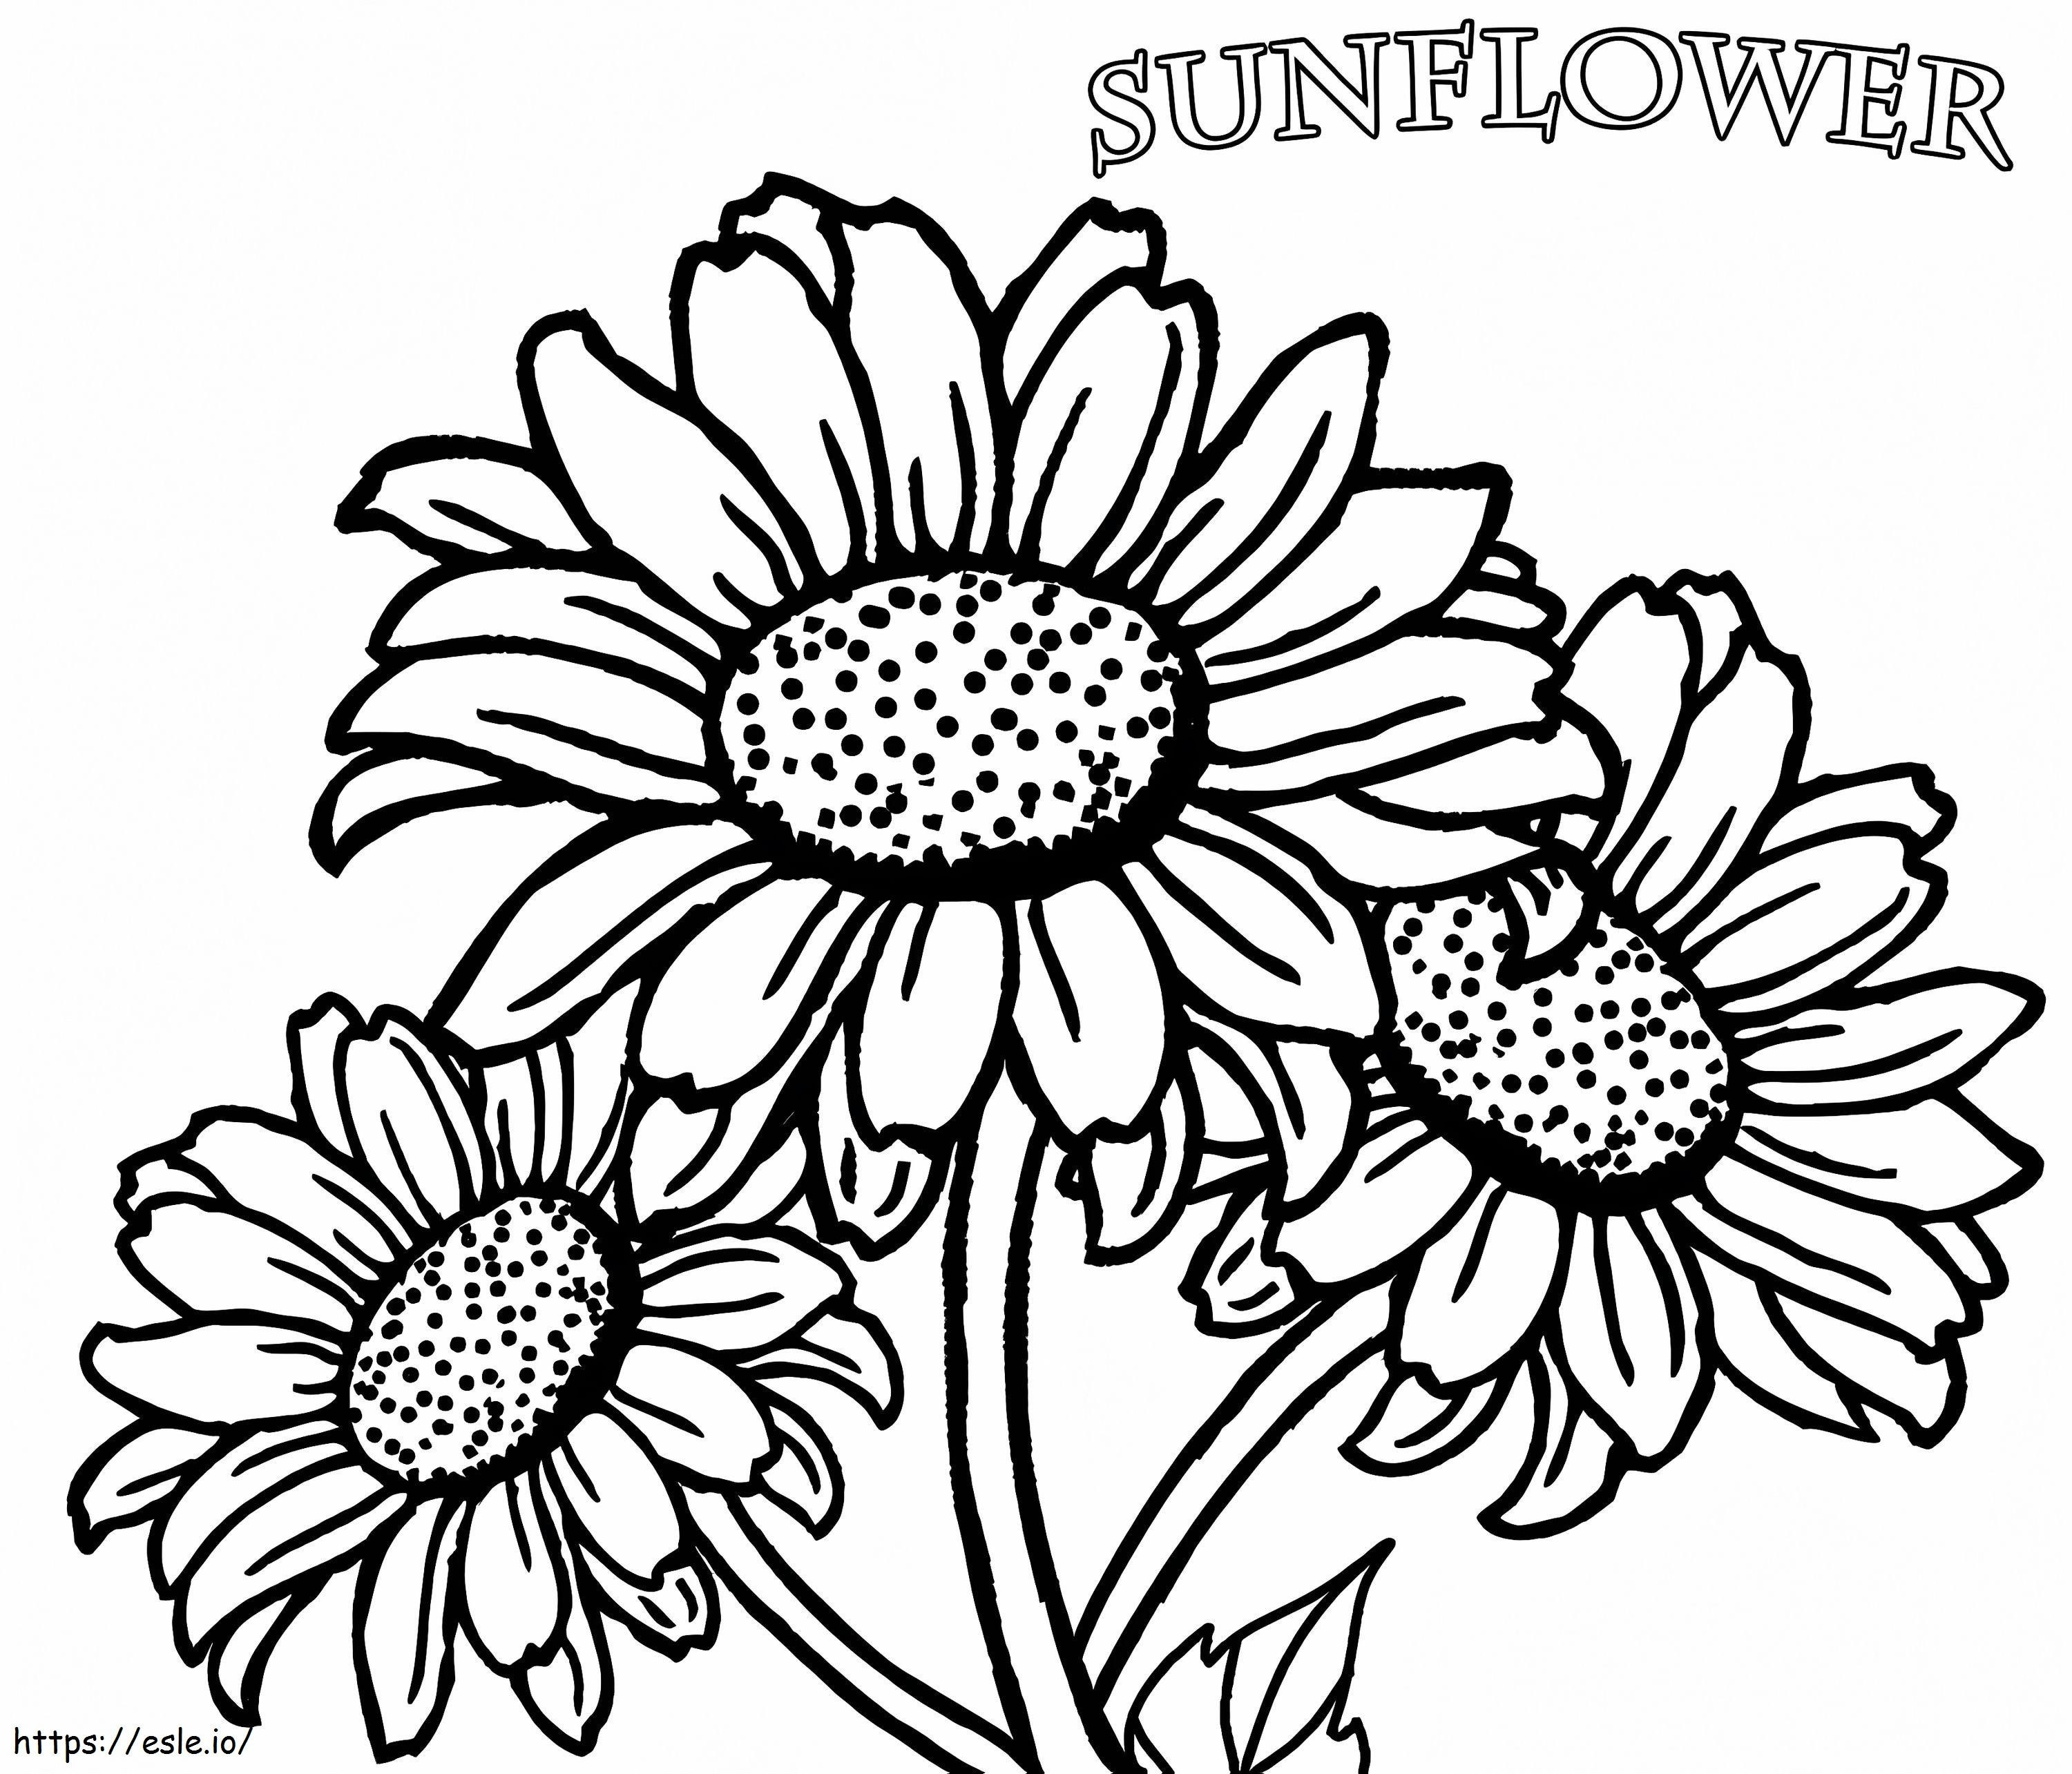 Realistic Sunflowers coloring page